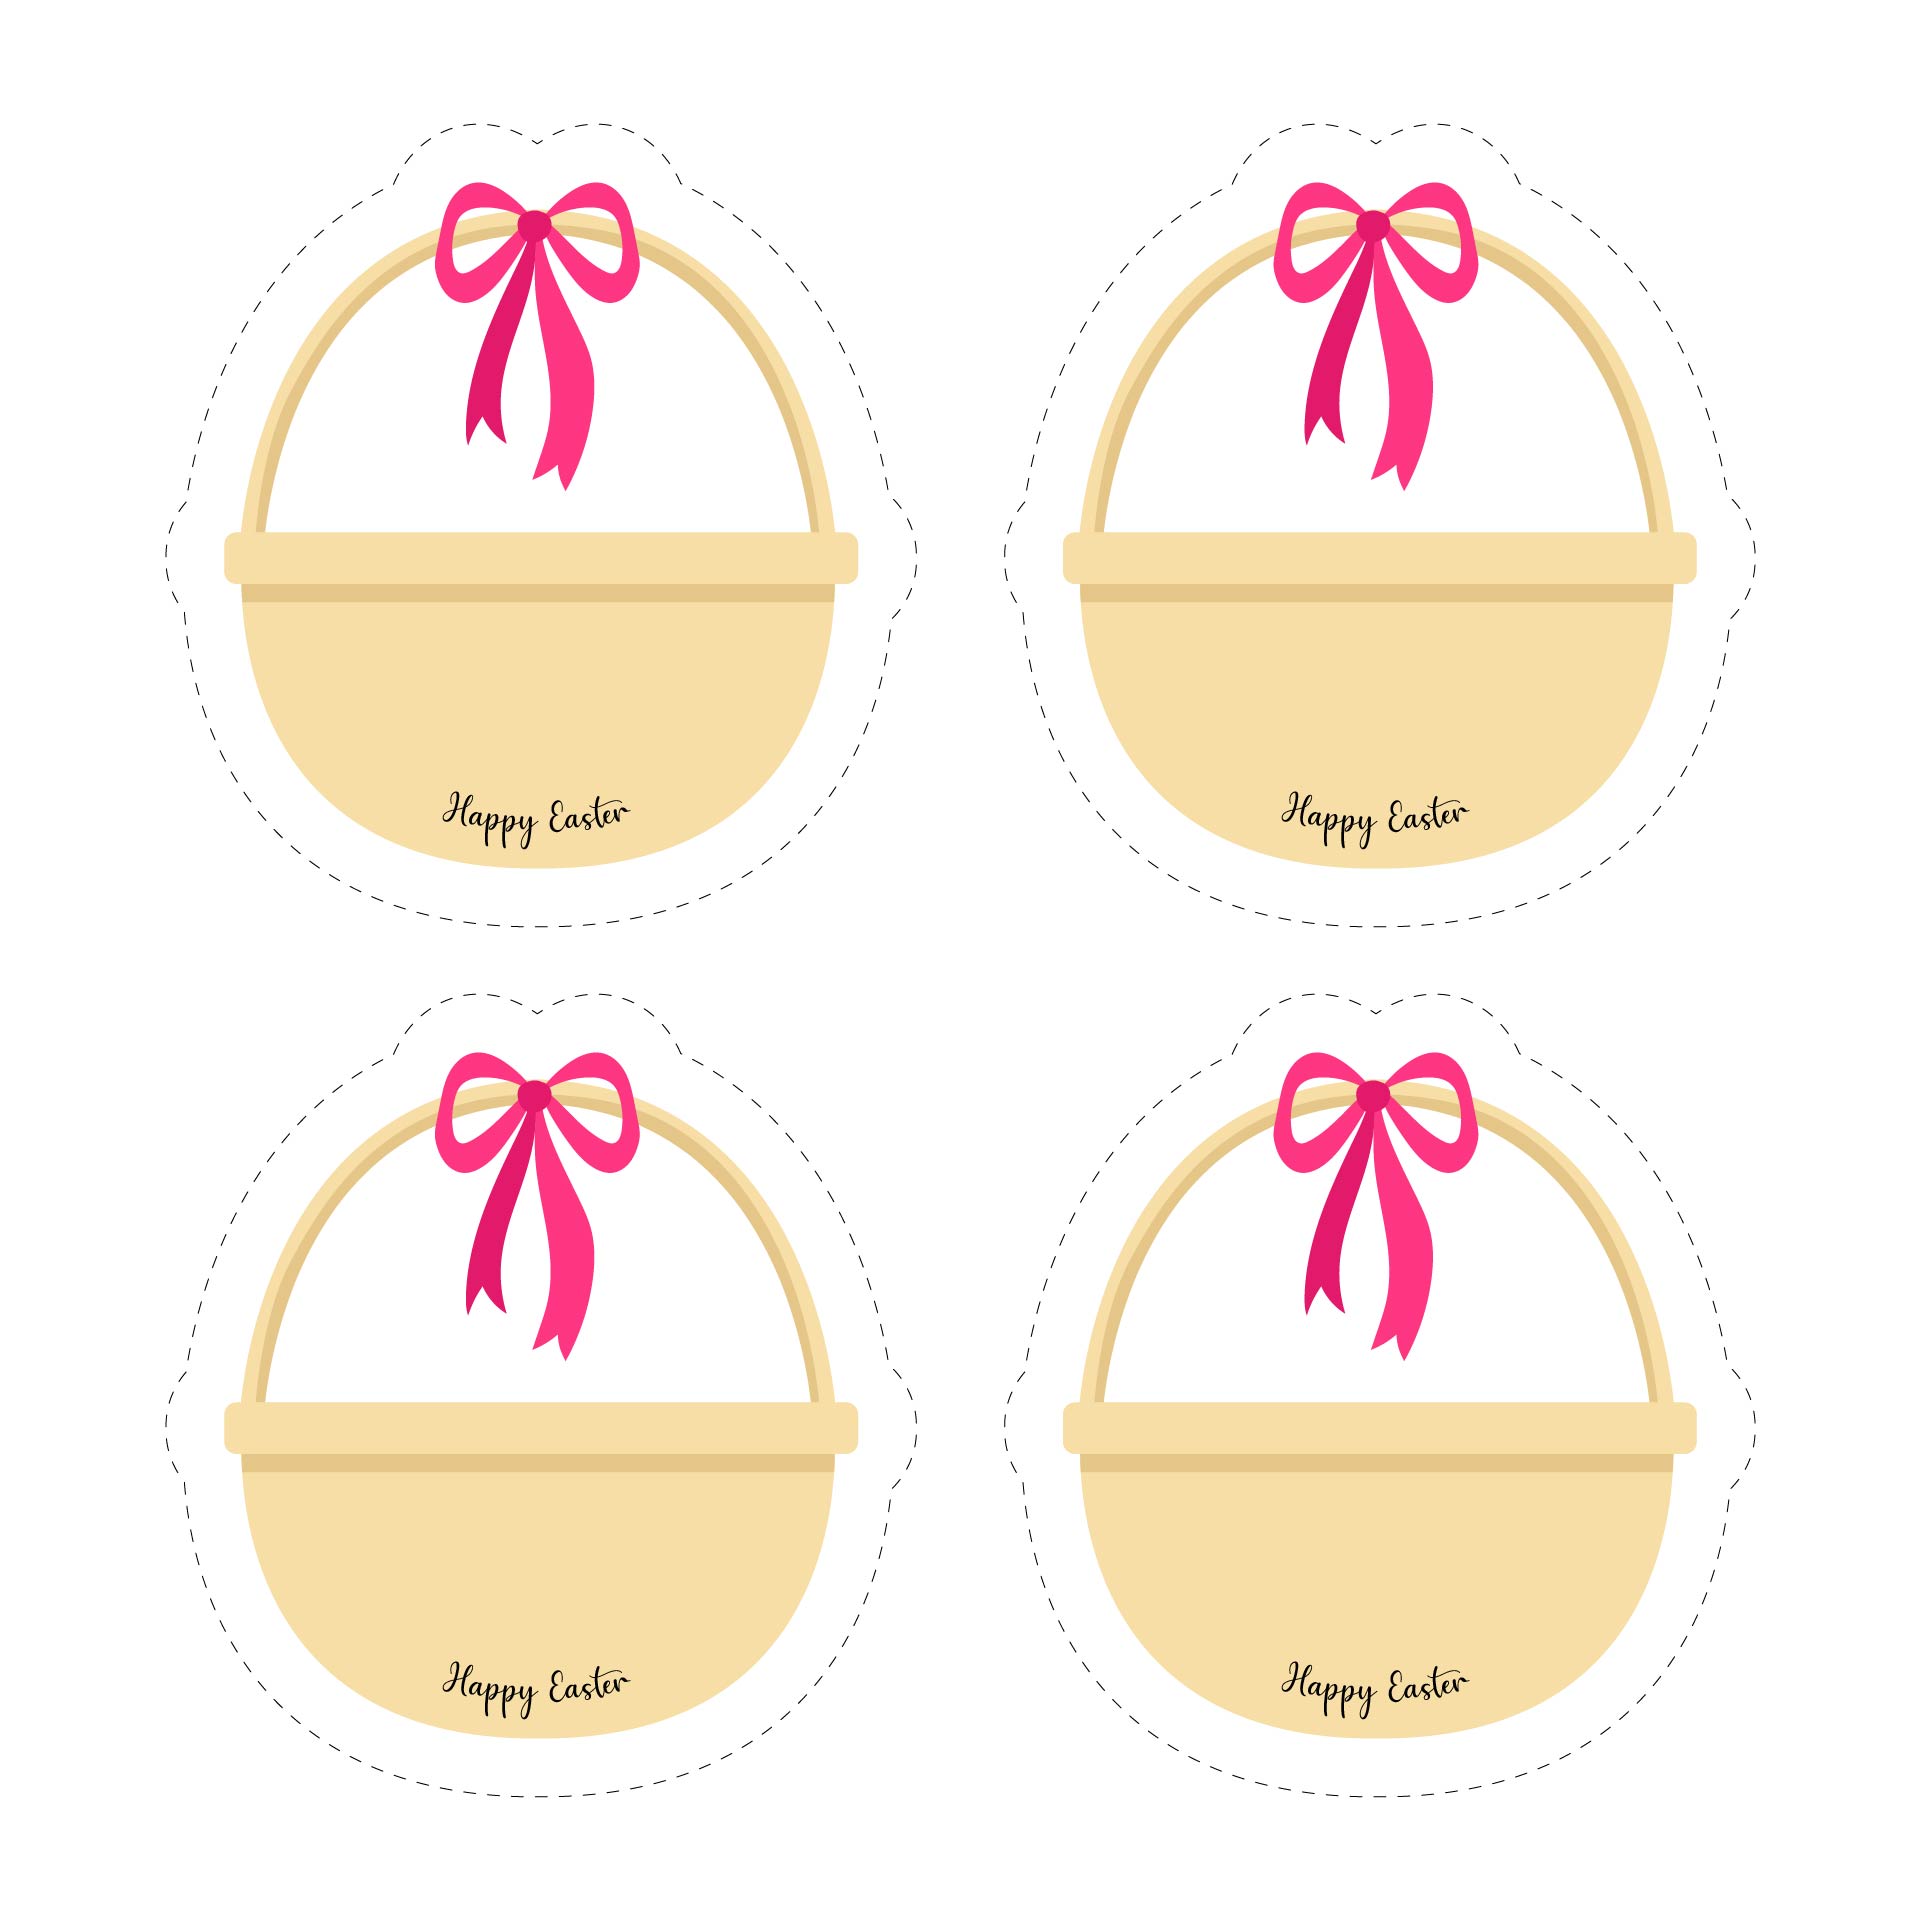 7-best-images-of-easter-basket-tags-printable-free-printable-easter